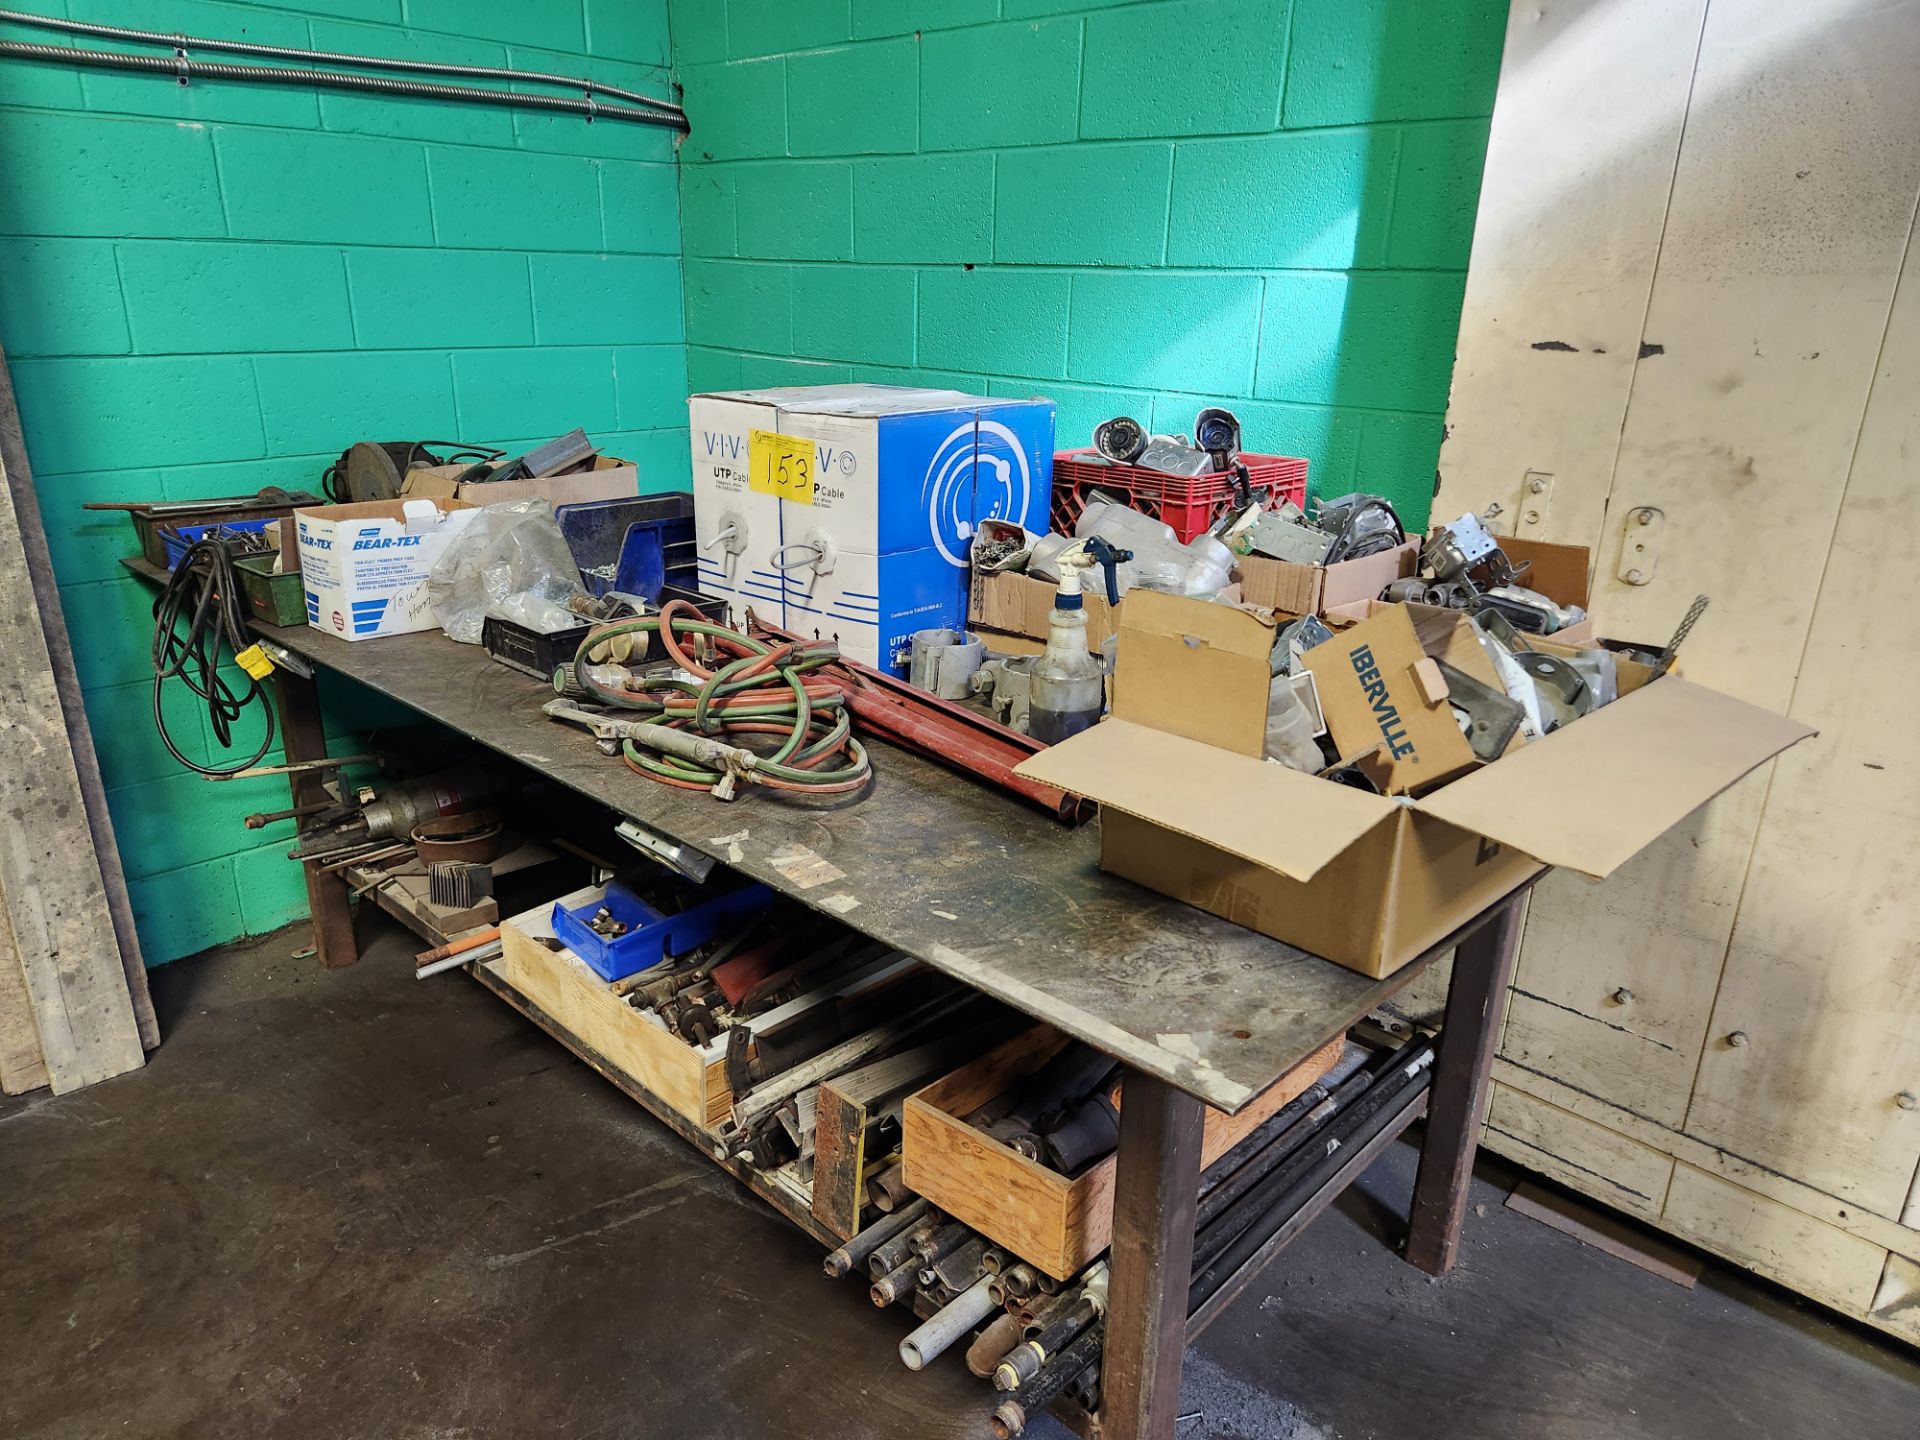 METAL WORKBENCH W/ CONTENTS INCLUDING ASST. OXY / ACETYLENE HOSE, GAUGES, ETC. - Image 2 of 2